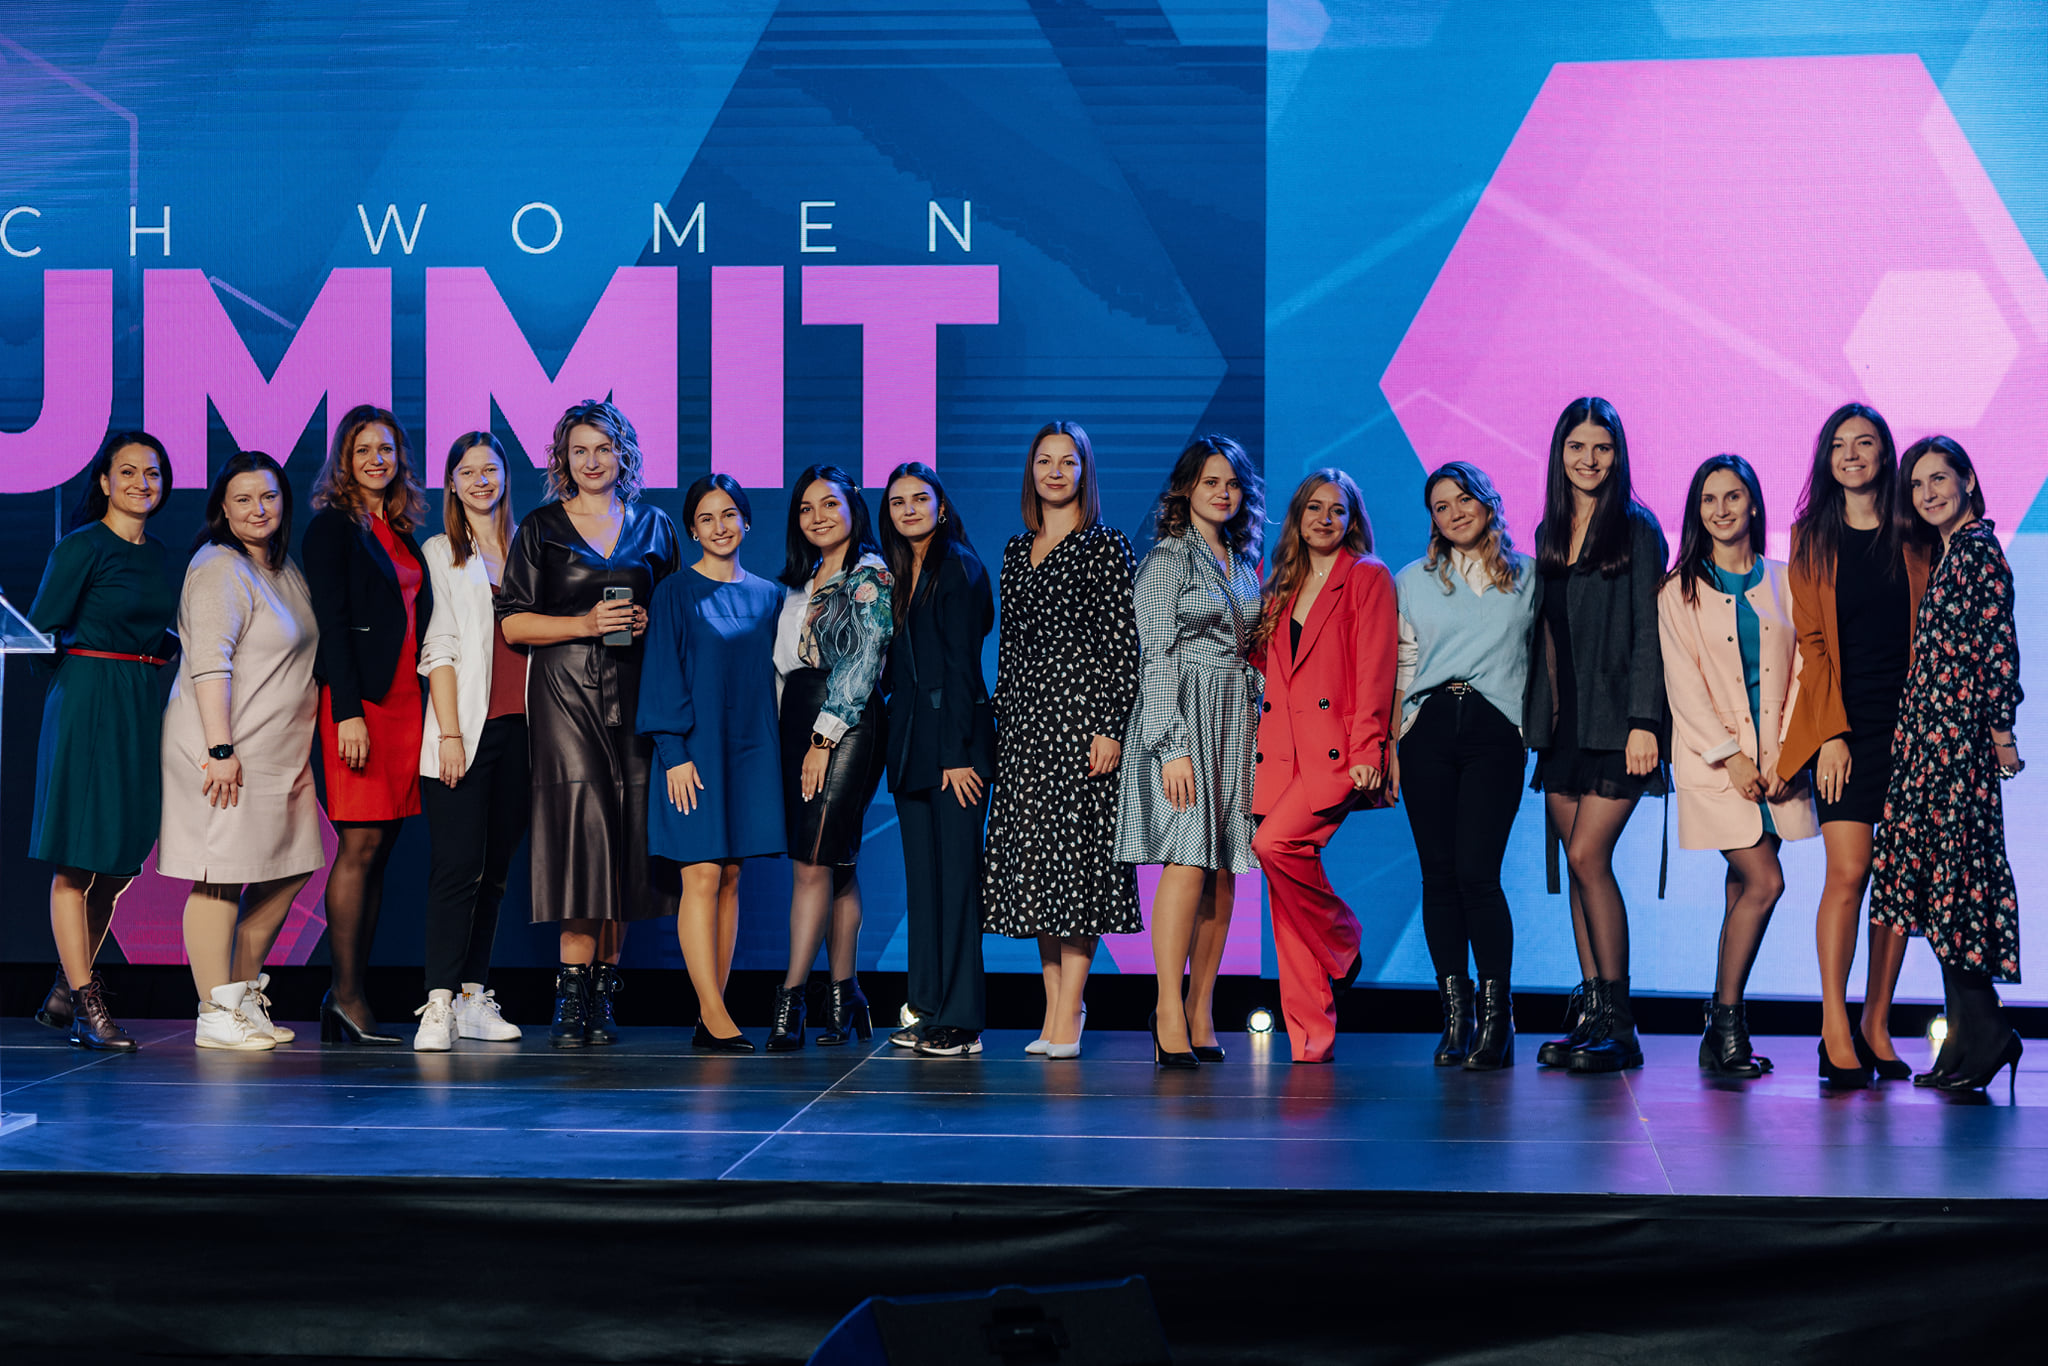 Women in Tech Summit 2021 with ENDAVA’s support